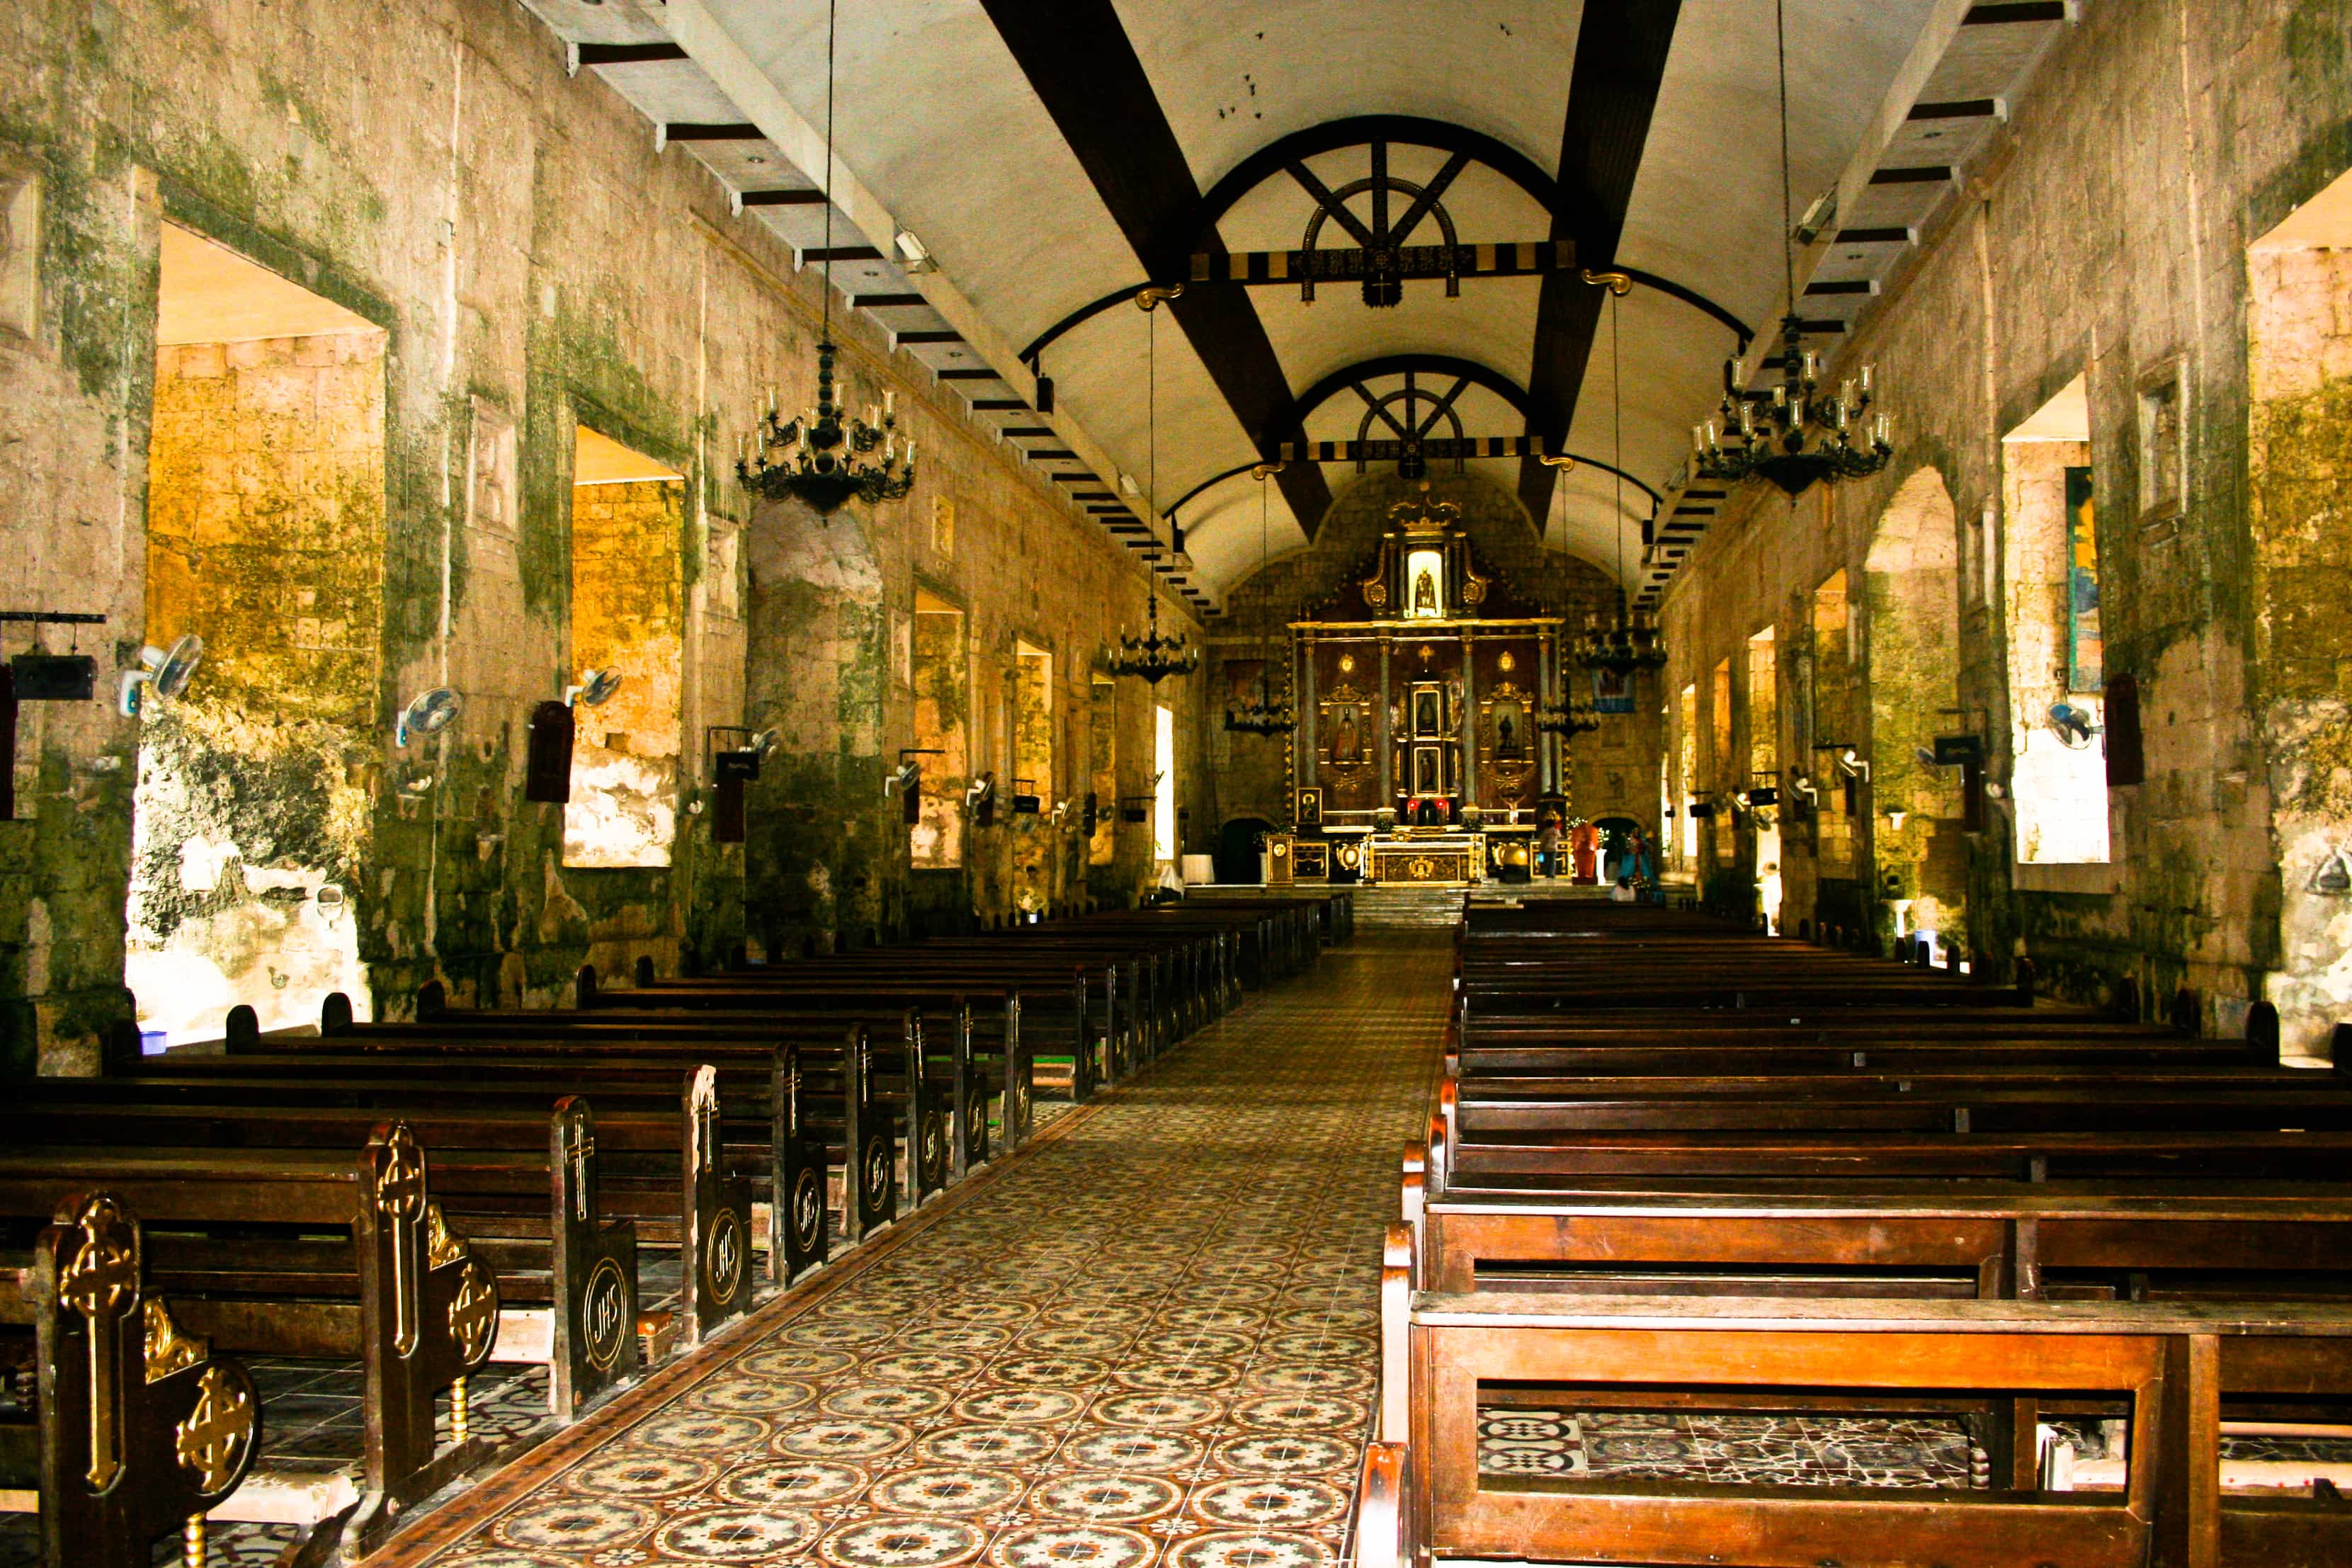 St Peter and Paul Church, Thigns to do in Bantayan Island, 